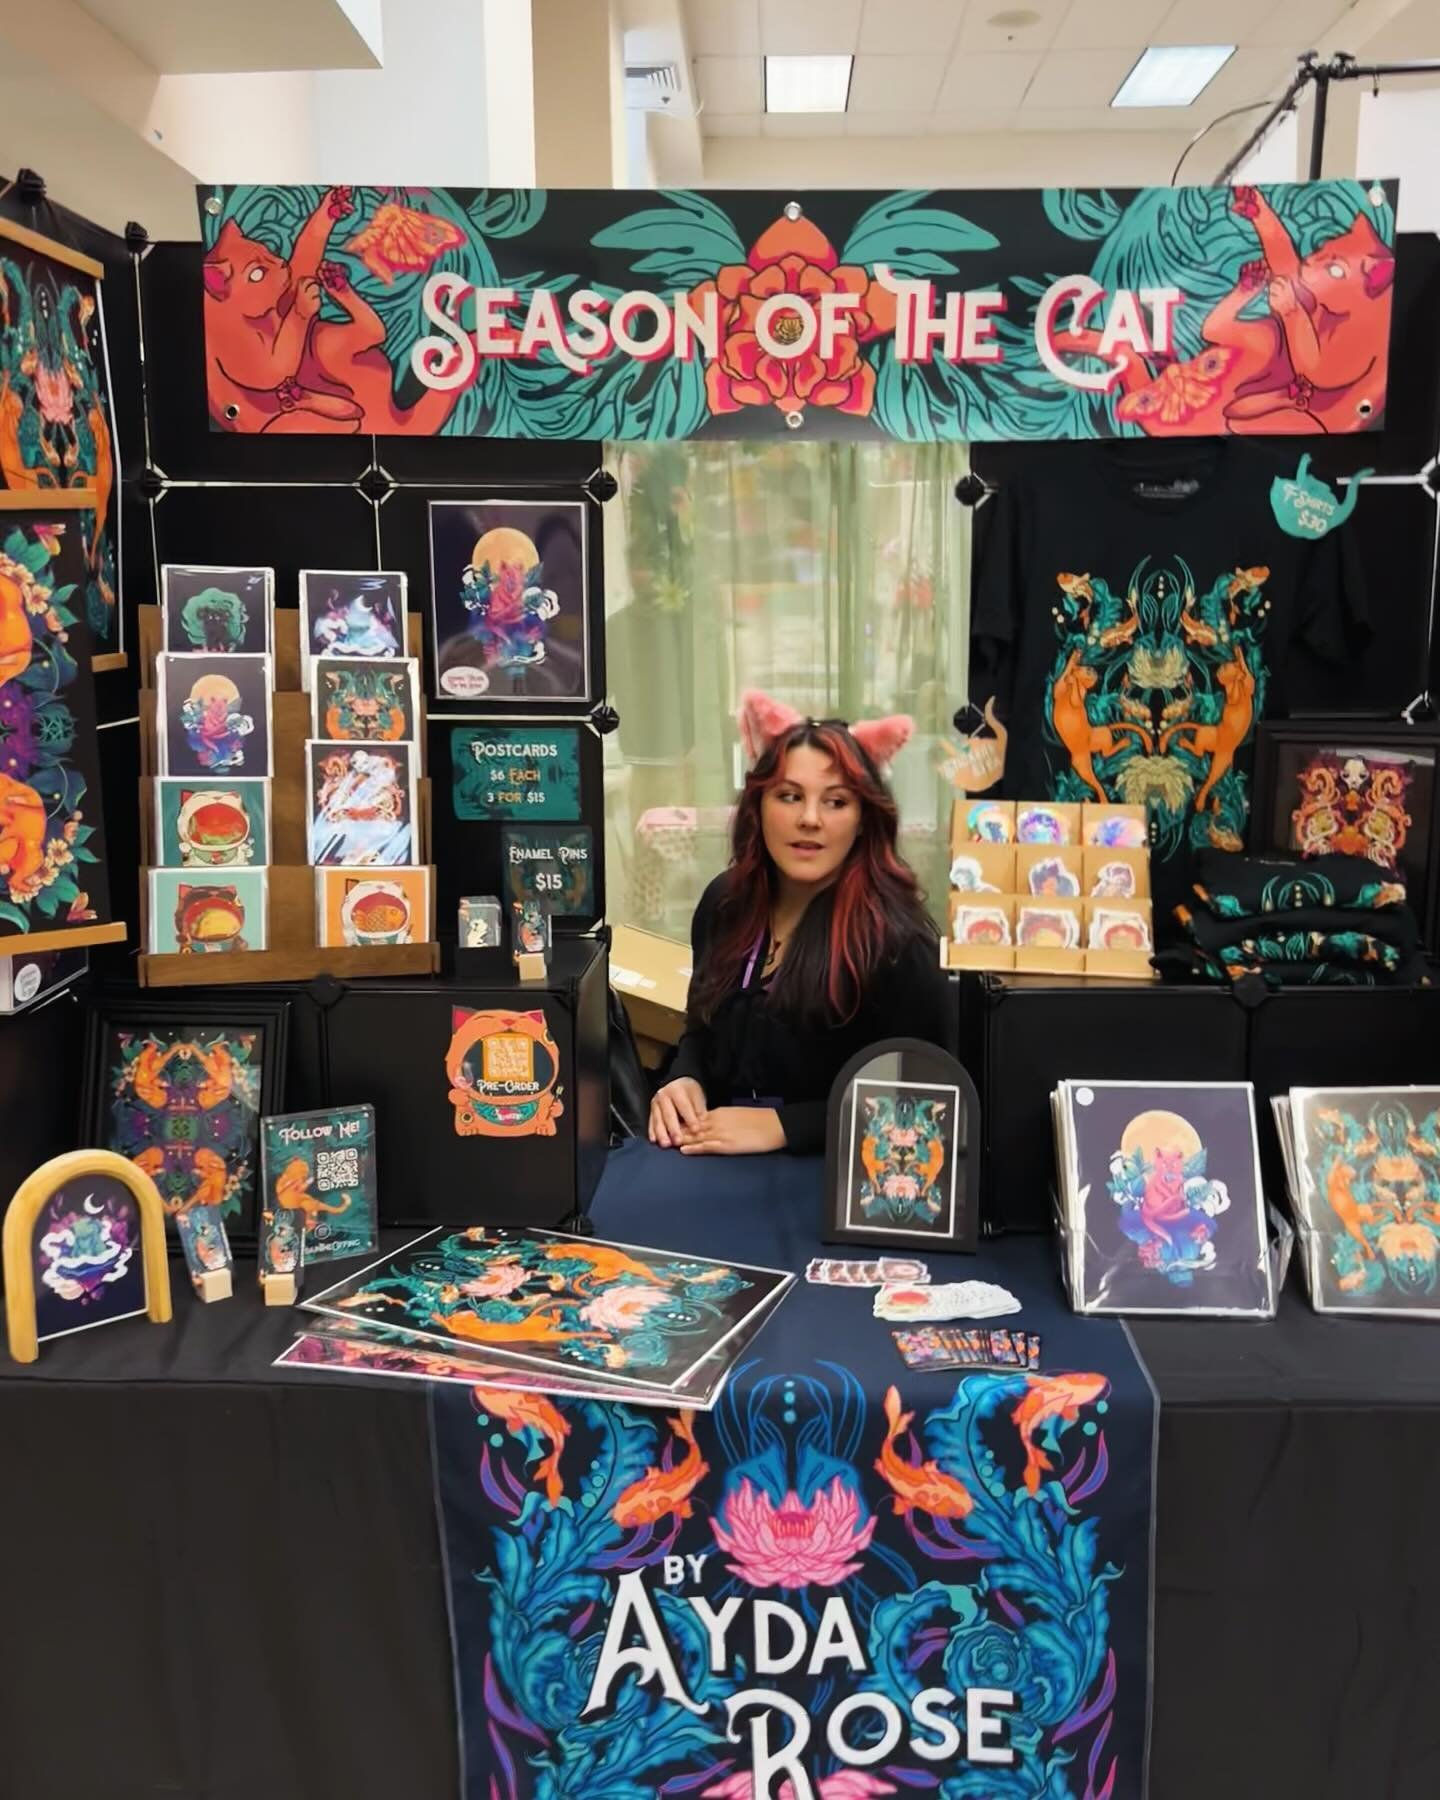 I&rsquo;ll be out tonight on Pac Ave for @tacomanightmarket with my Season of the Cat setup. If you&rsquo;re in the market for some Cat related goods, come see me! 5-10pm, 710 Pacific Ave in Tacoma.
-
-
-
#tacomawa #tacomanightmarket #tacomaartist #w